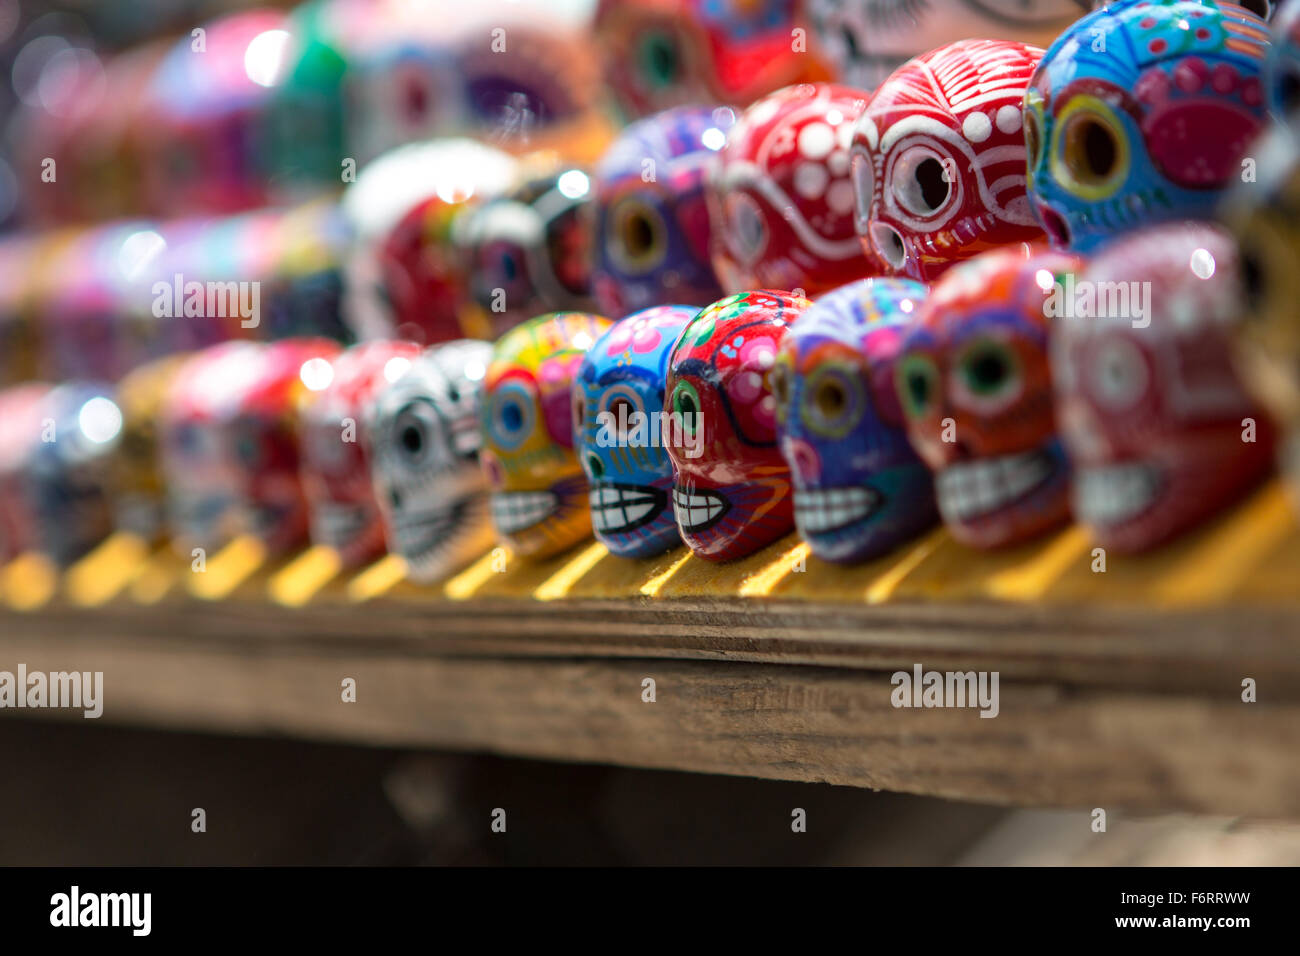 Day of the dead themed souvenirs for sale at market stall at Chichen Itza, Mexico Stock Photo